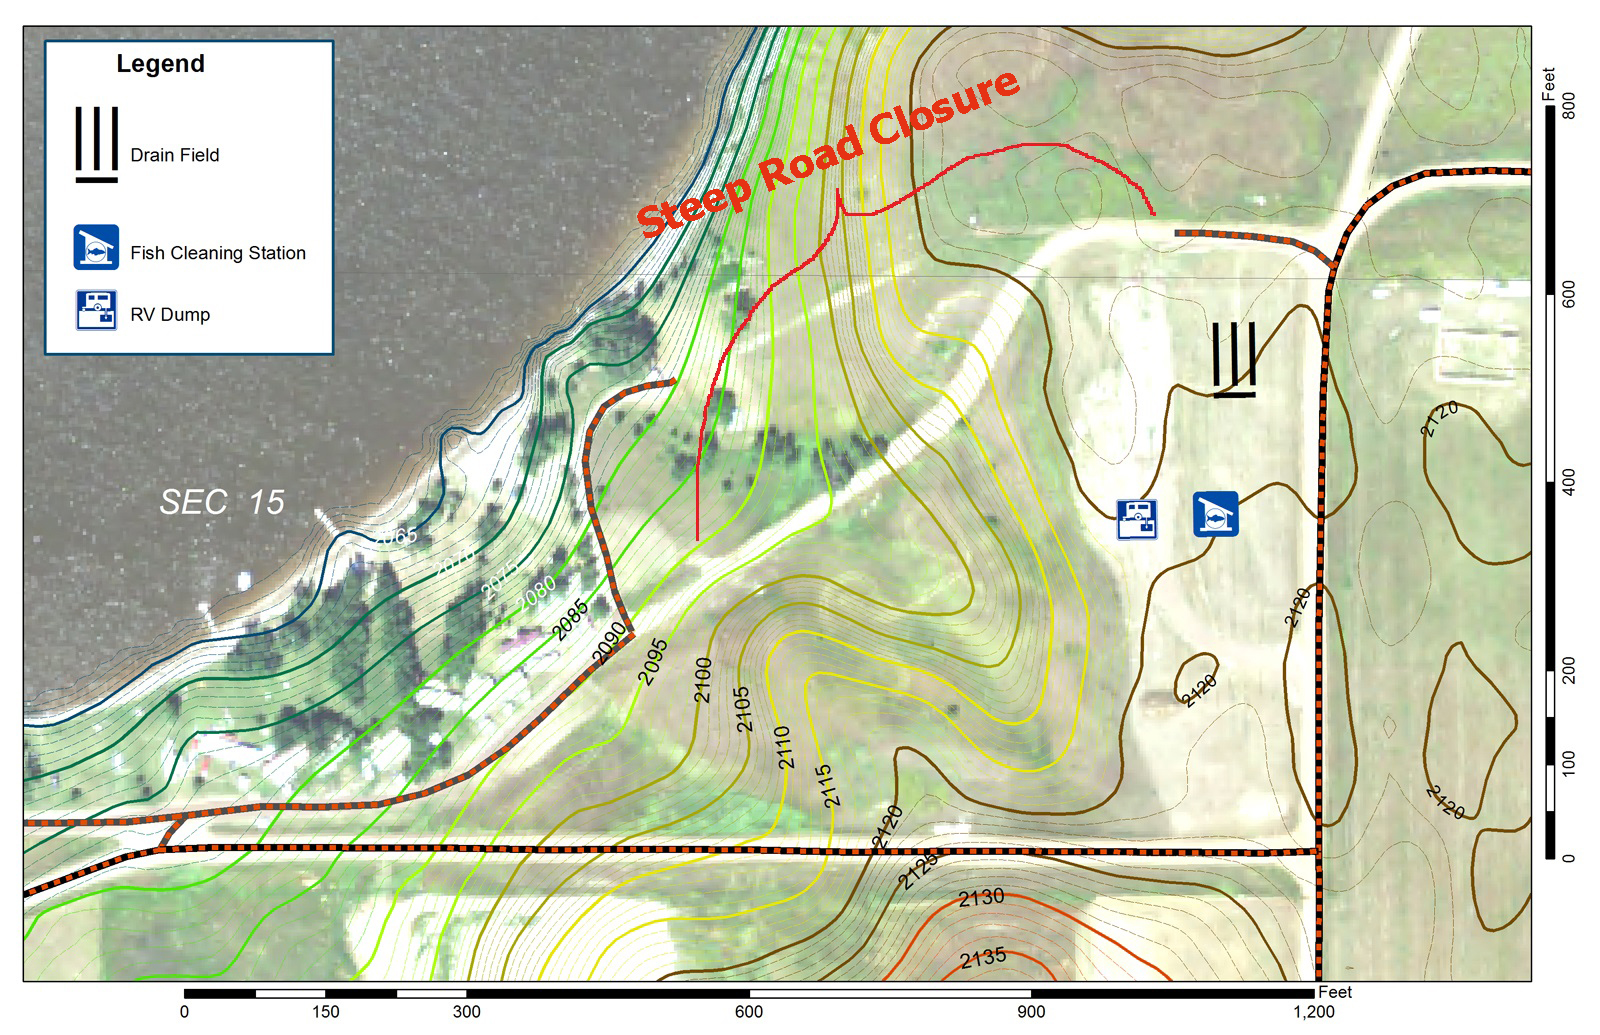 The map uses an IFSAR-created contour map of 1-foot (0.3-m) intervals and a 2014 National Agricultural Image Program orthoimage base for planning purposes. North is oriented toward the top of the image.